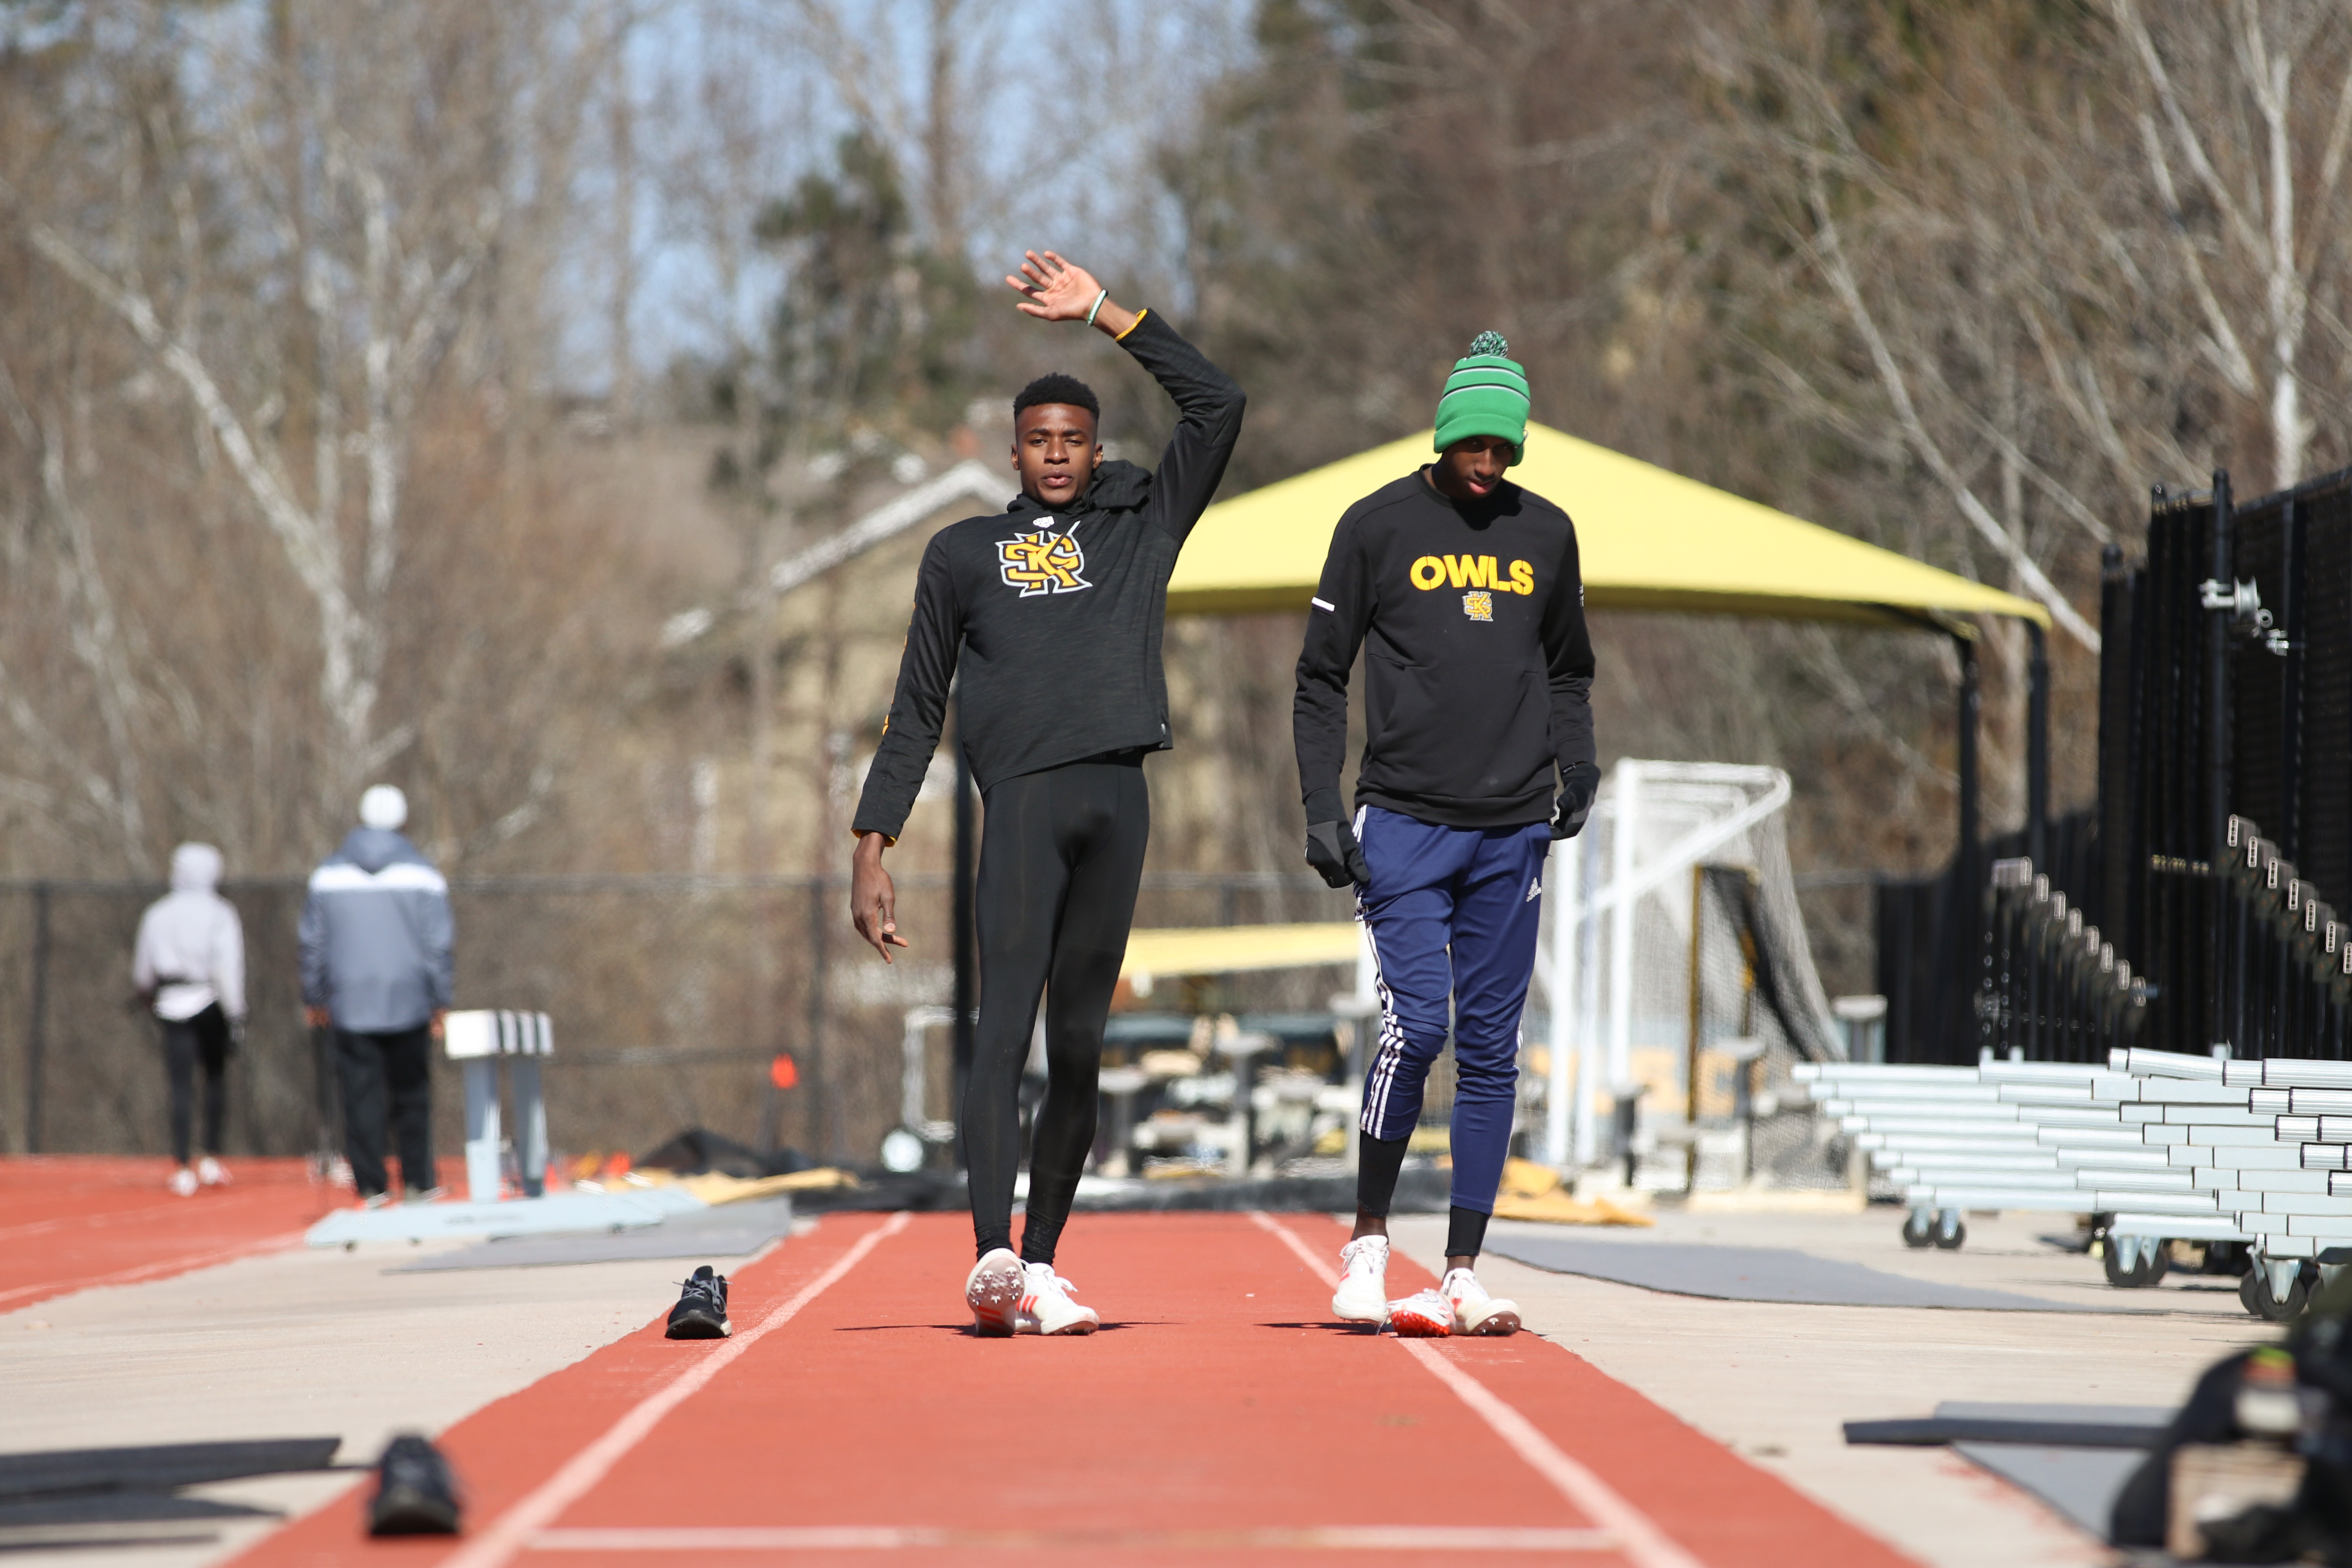 3 Owls advance to NCAA track and field championship after preliminary rounds